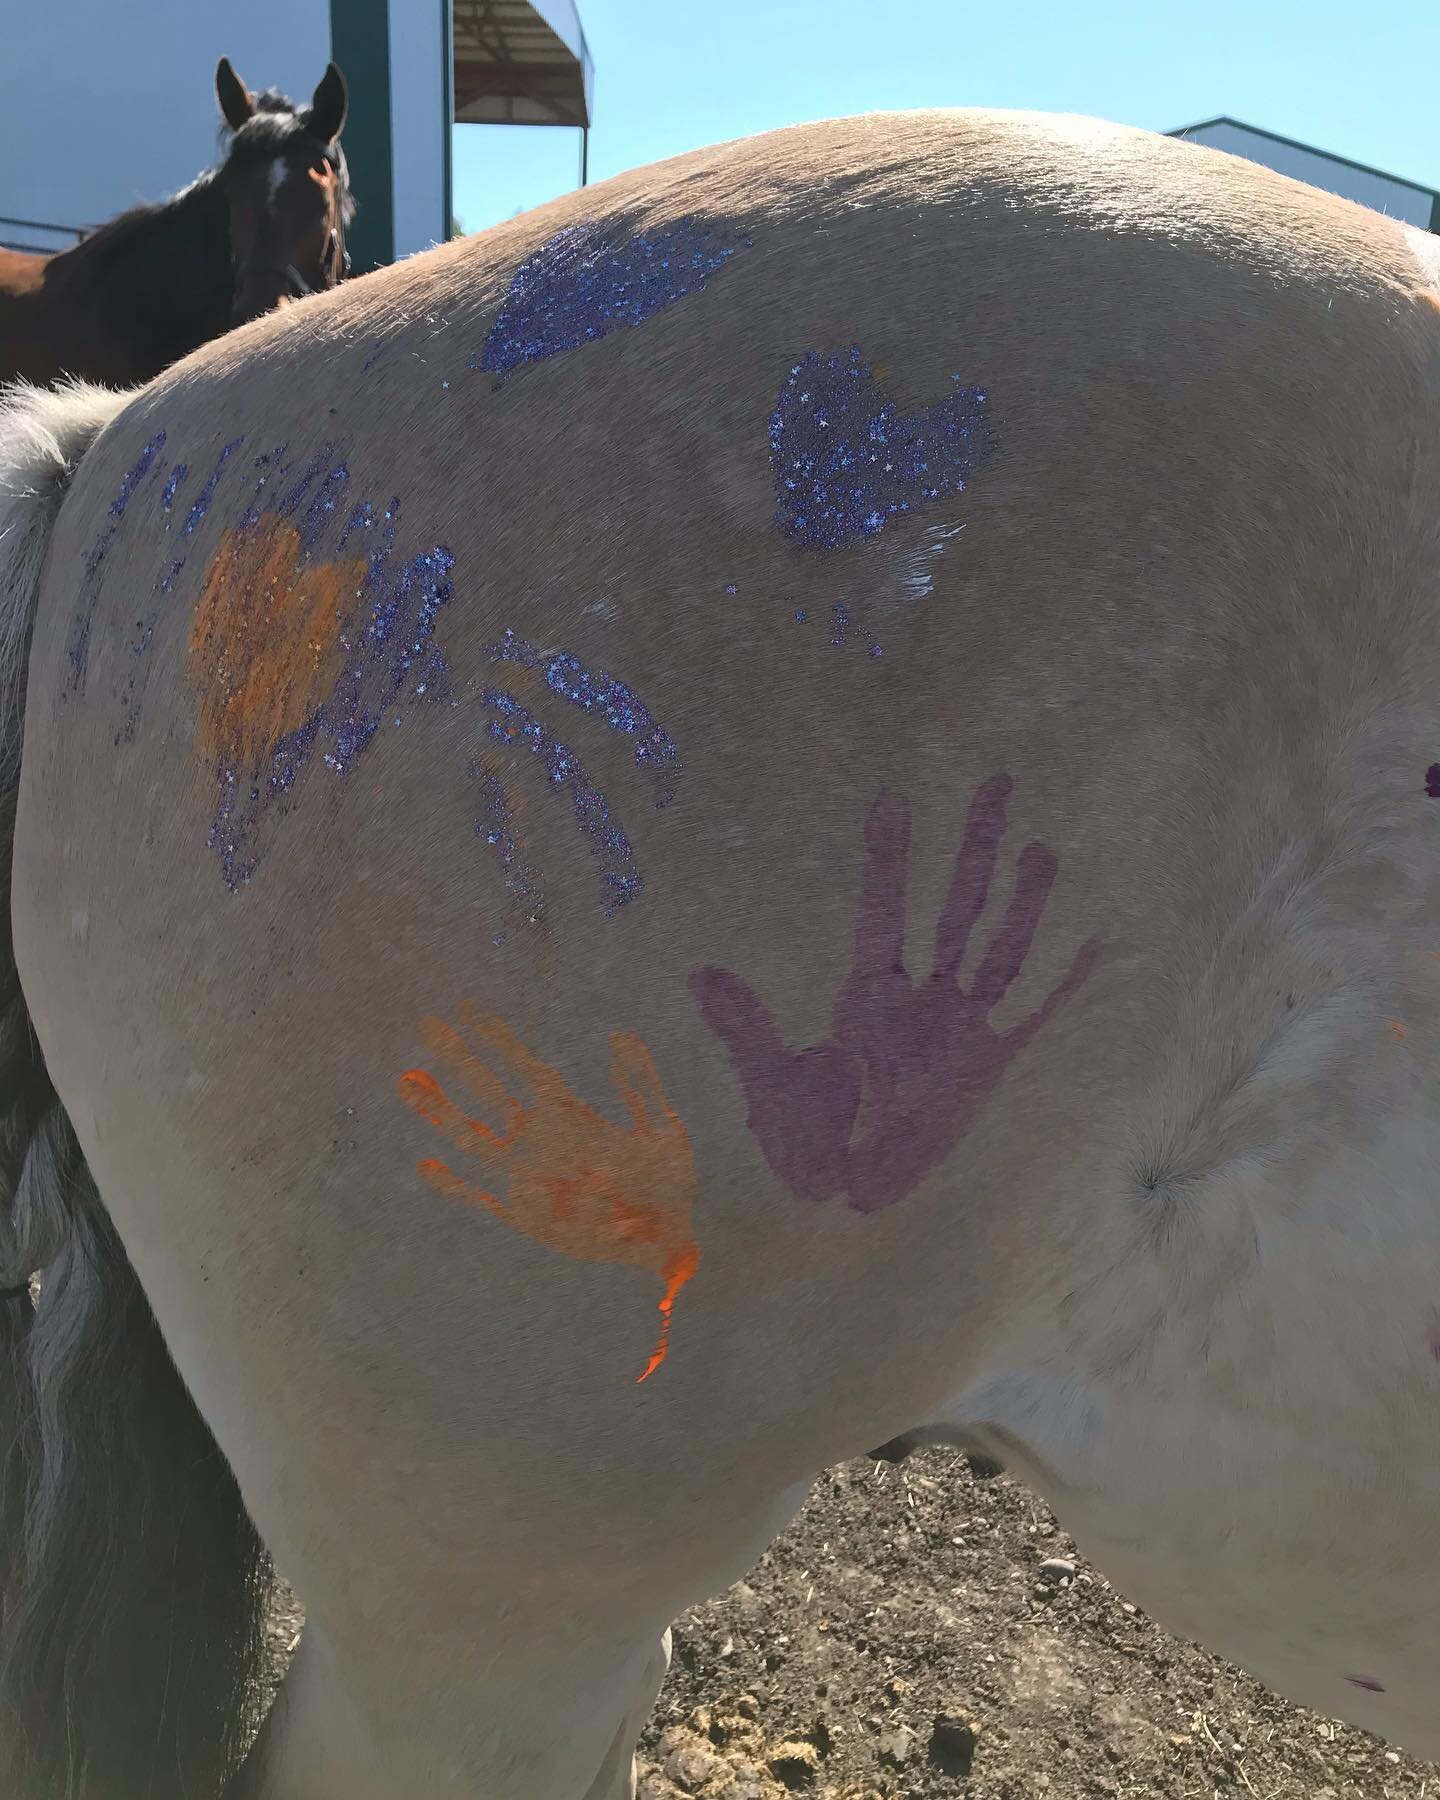 There have been beautiful connections made at our first two 1/2 day camps.  Painting day is always a good opportunity to build trust. Each rider has a beautiful story in their painting and embellishments.